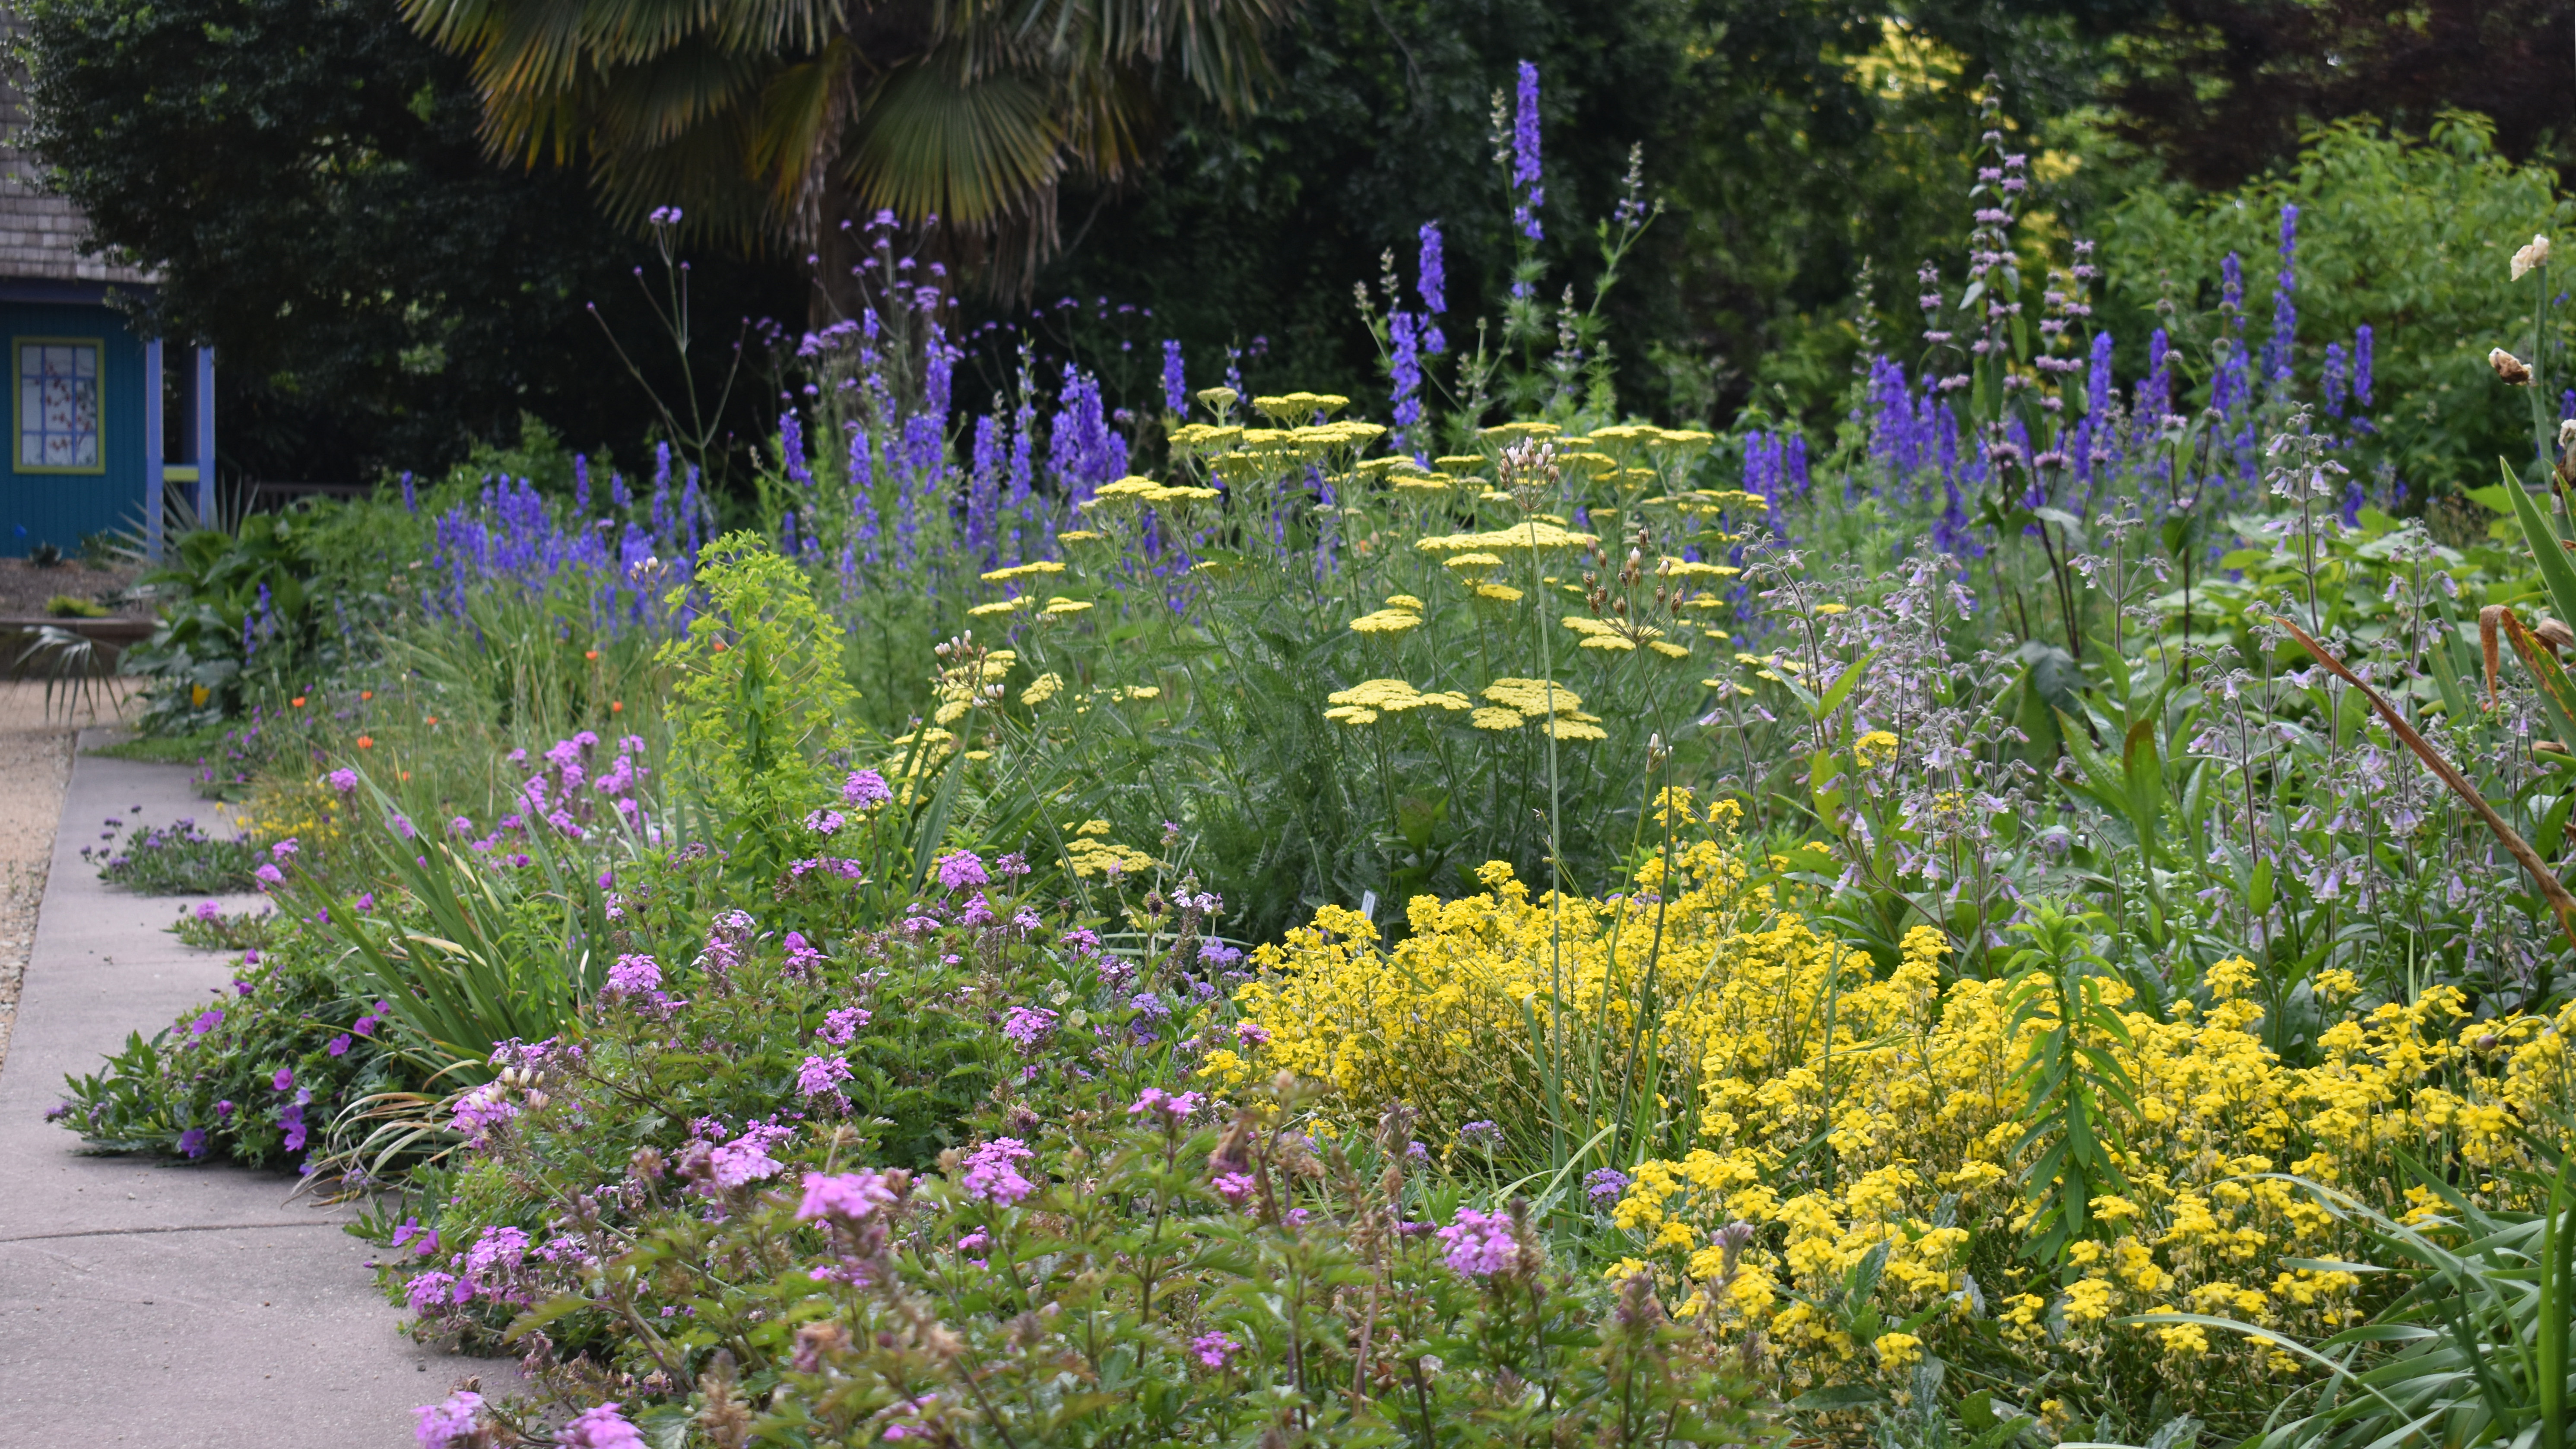 A drift of herbaceous perennials leading up to the necessary